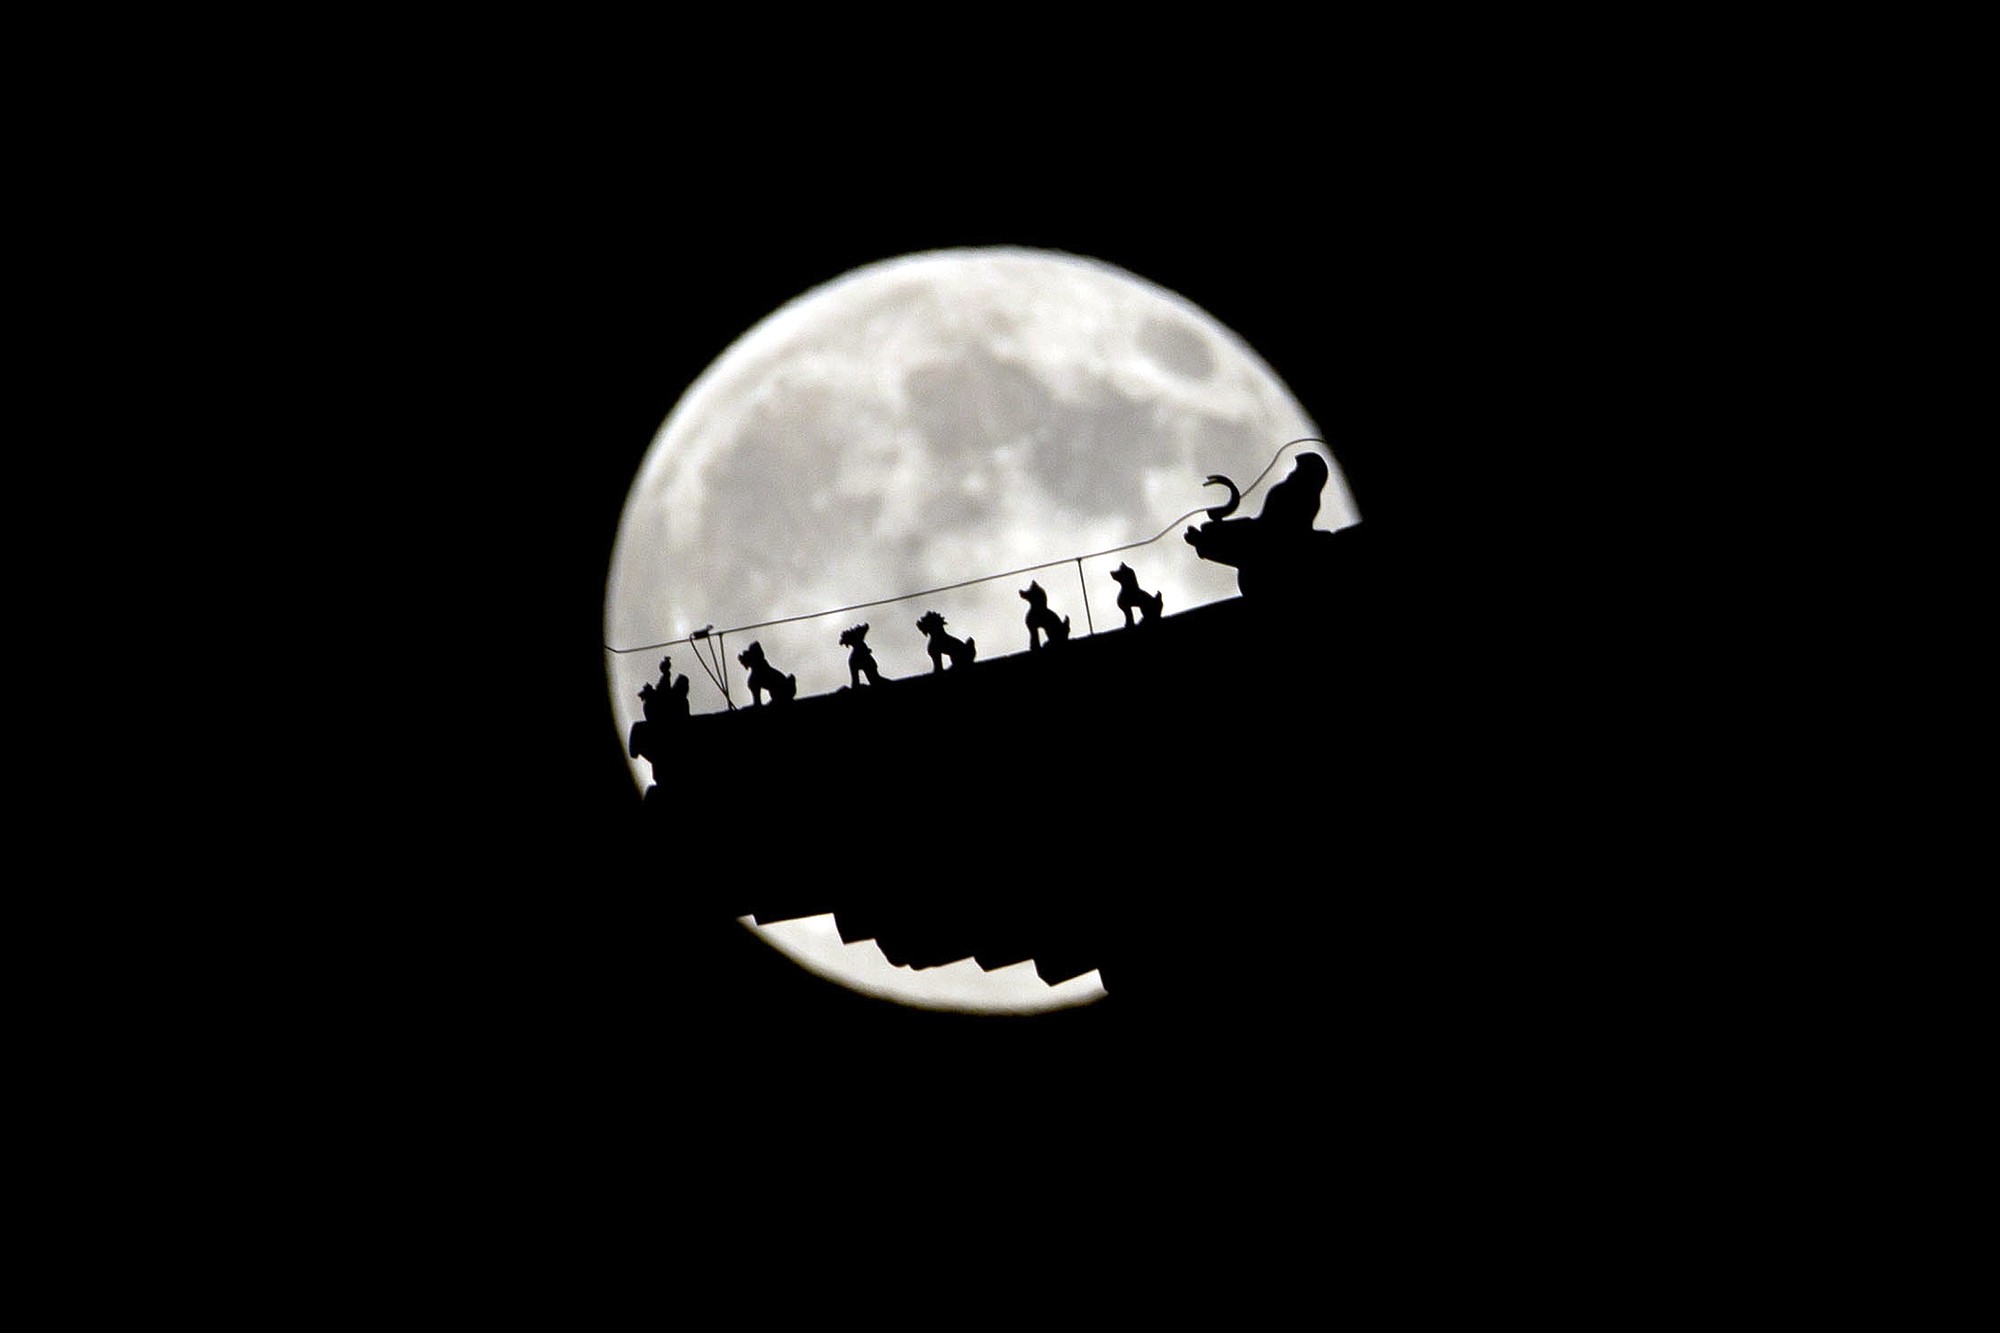 The July 12 perigee moon, also known as a supermoon, as it rises behind figurines on a Chinese pavilion in Beijing, China. The phenomenon, which scientists call a &quot;perigee moon,&quot; occurs when the moon is near the horizon and appears larger and brighter than other full moons.